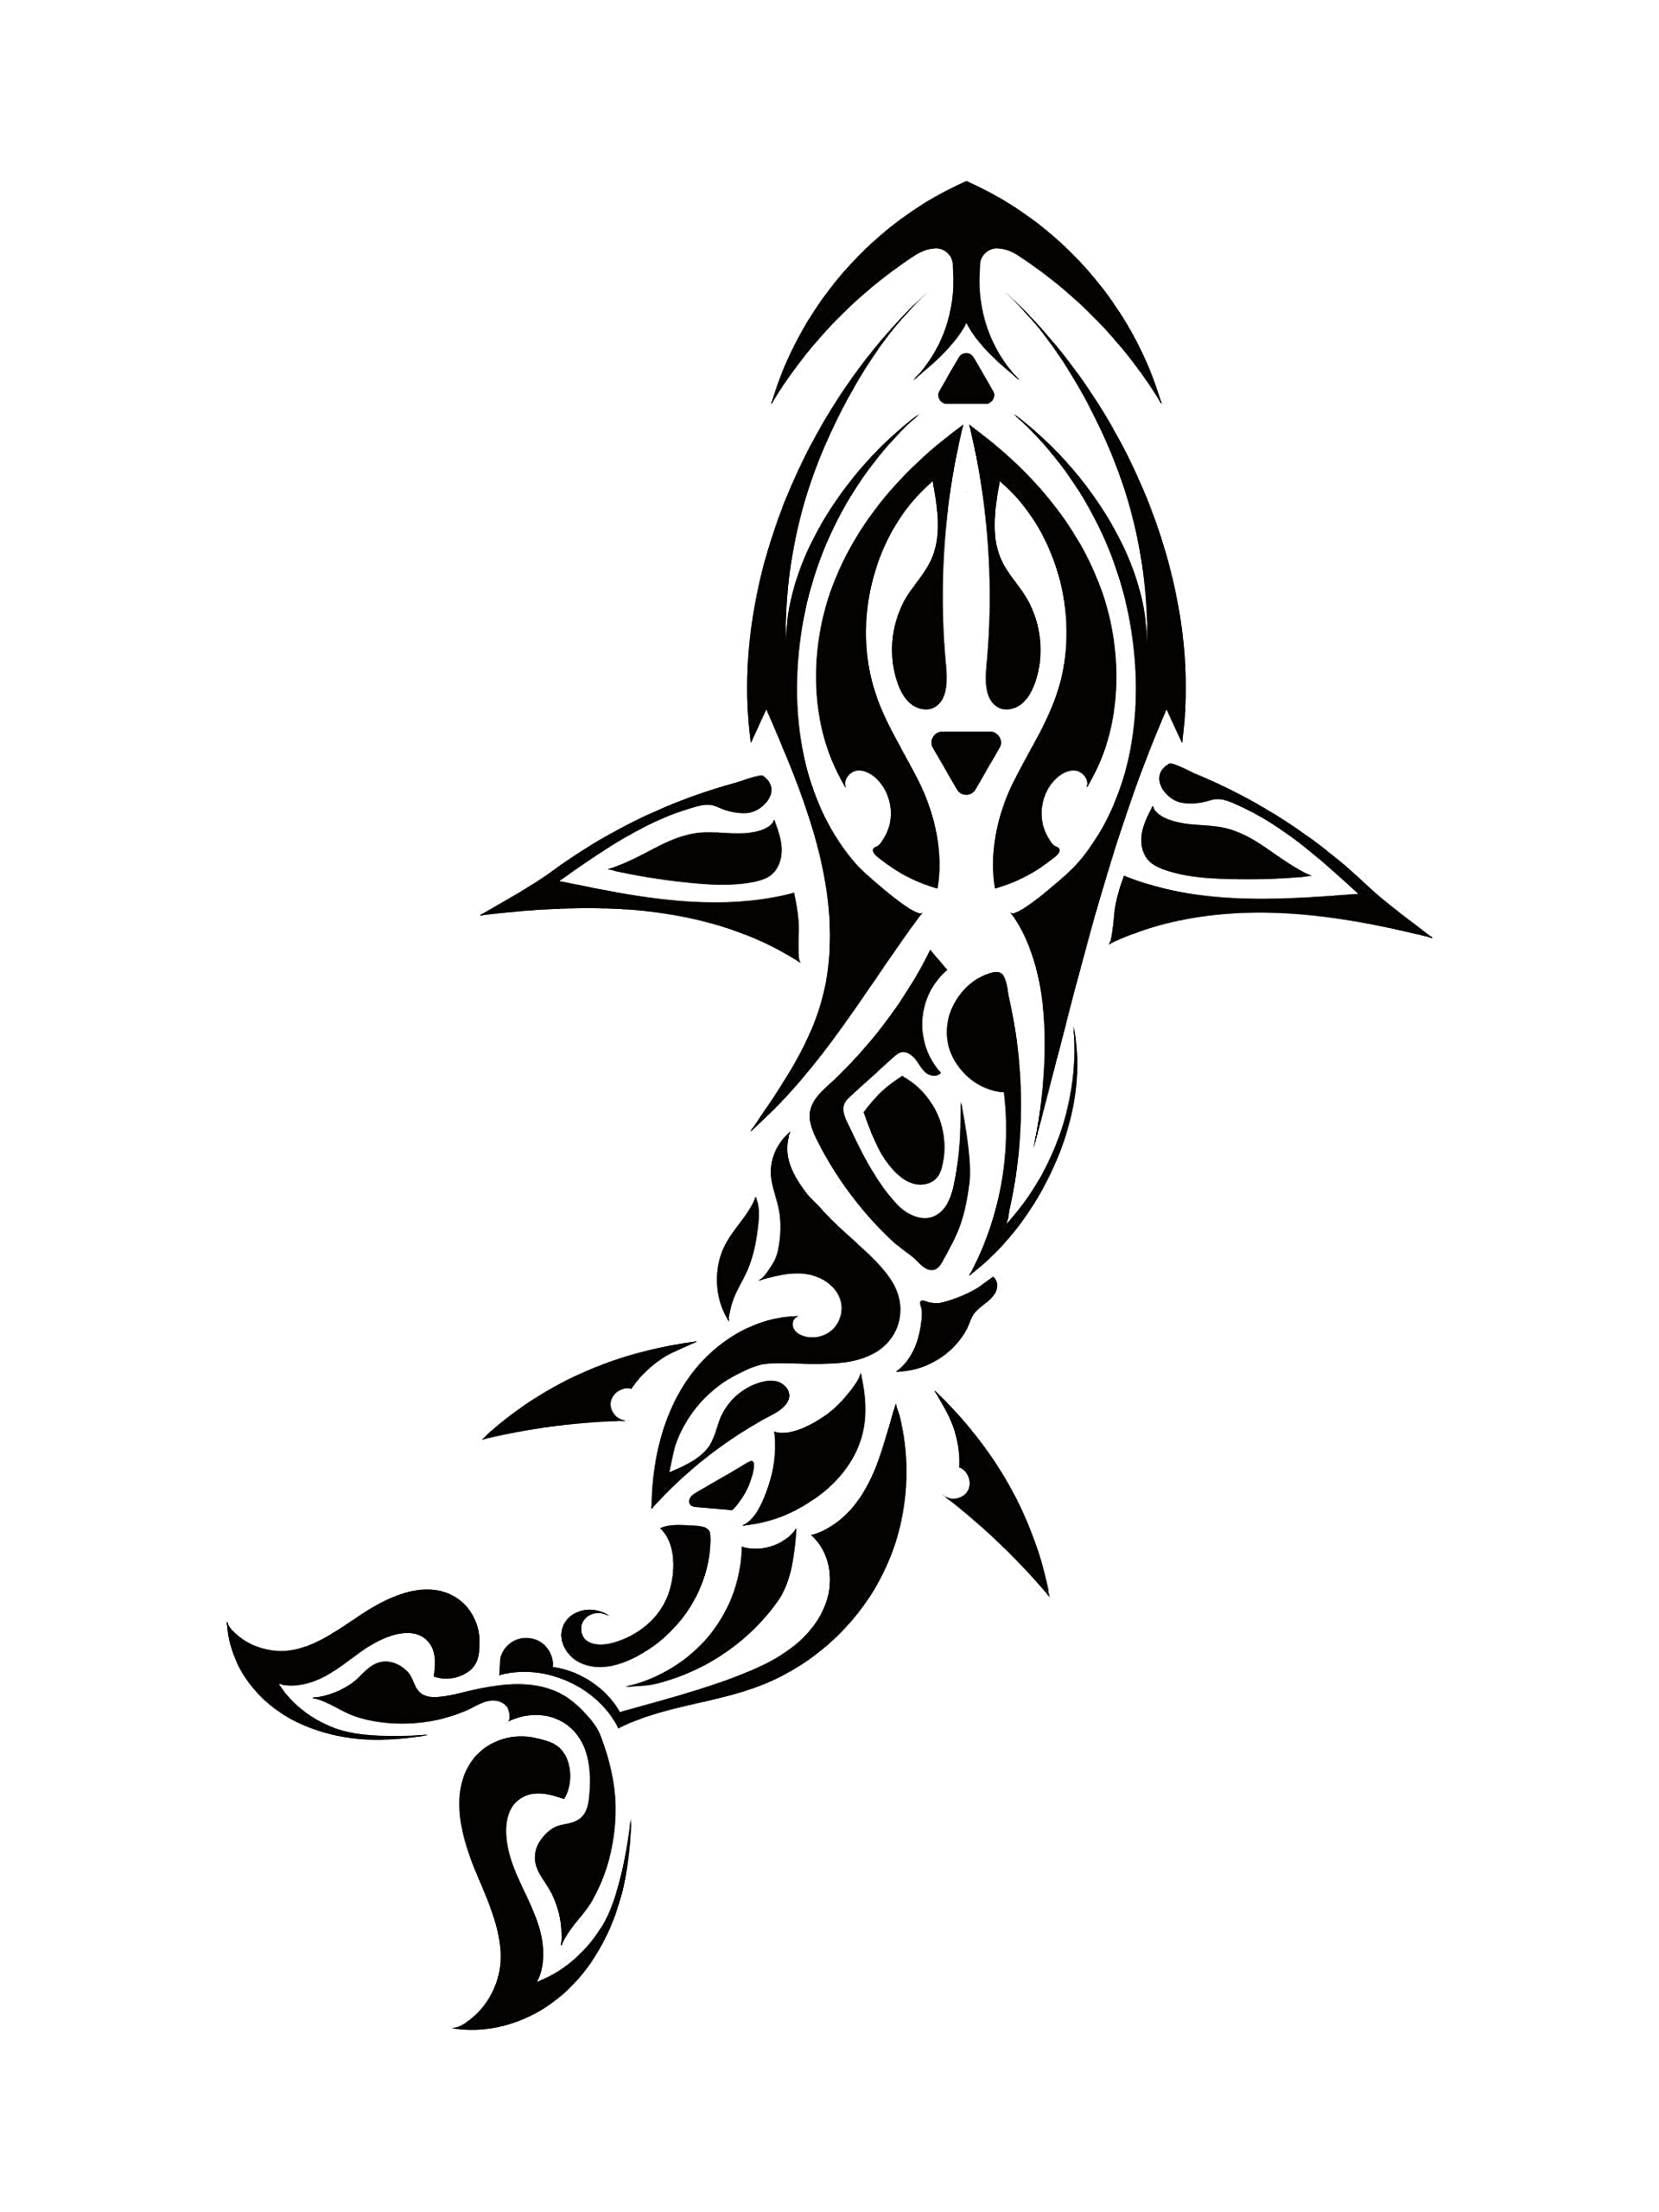 Maori Tribal Style Tattoo Pattern Fit For A Leg Or Arm Hand